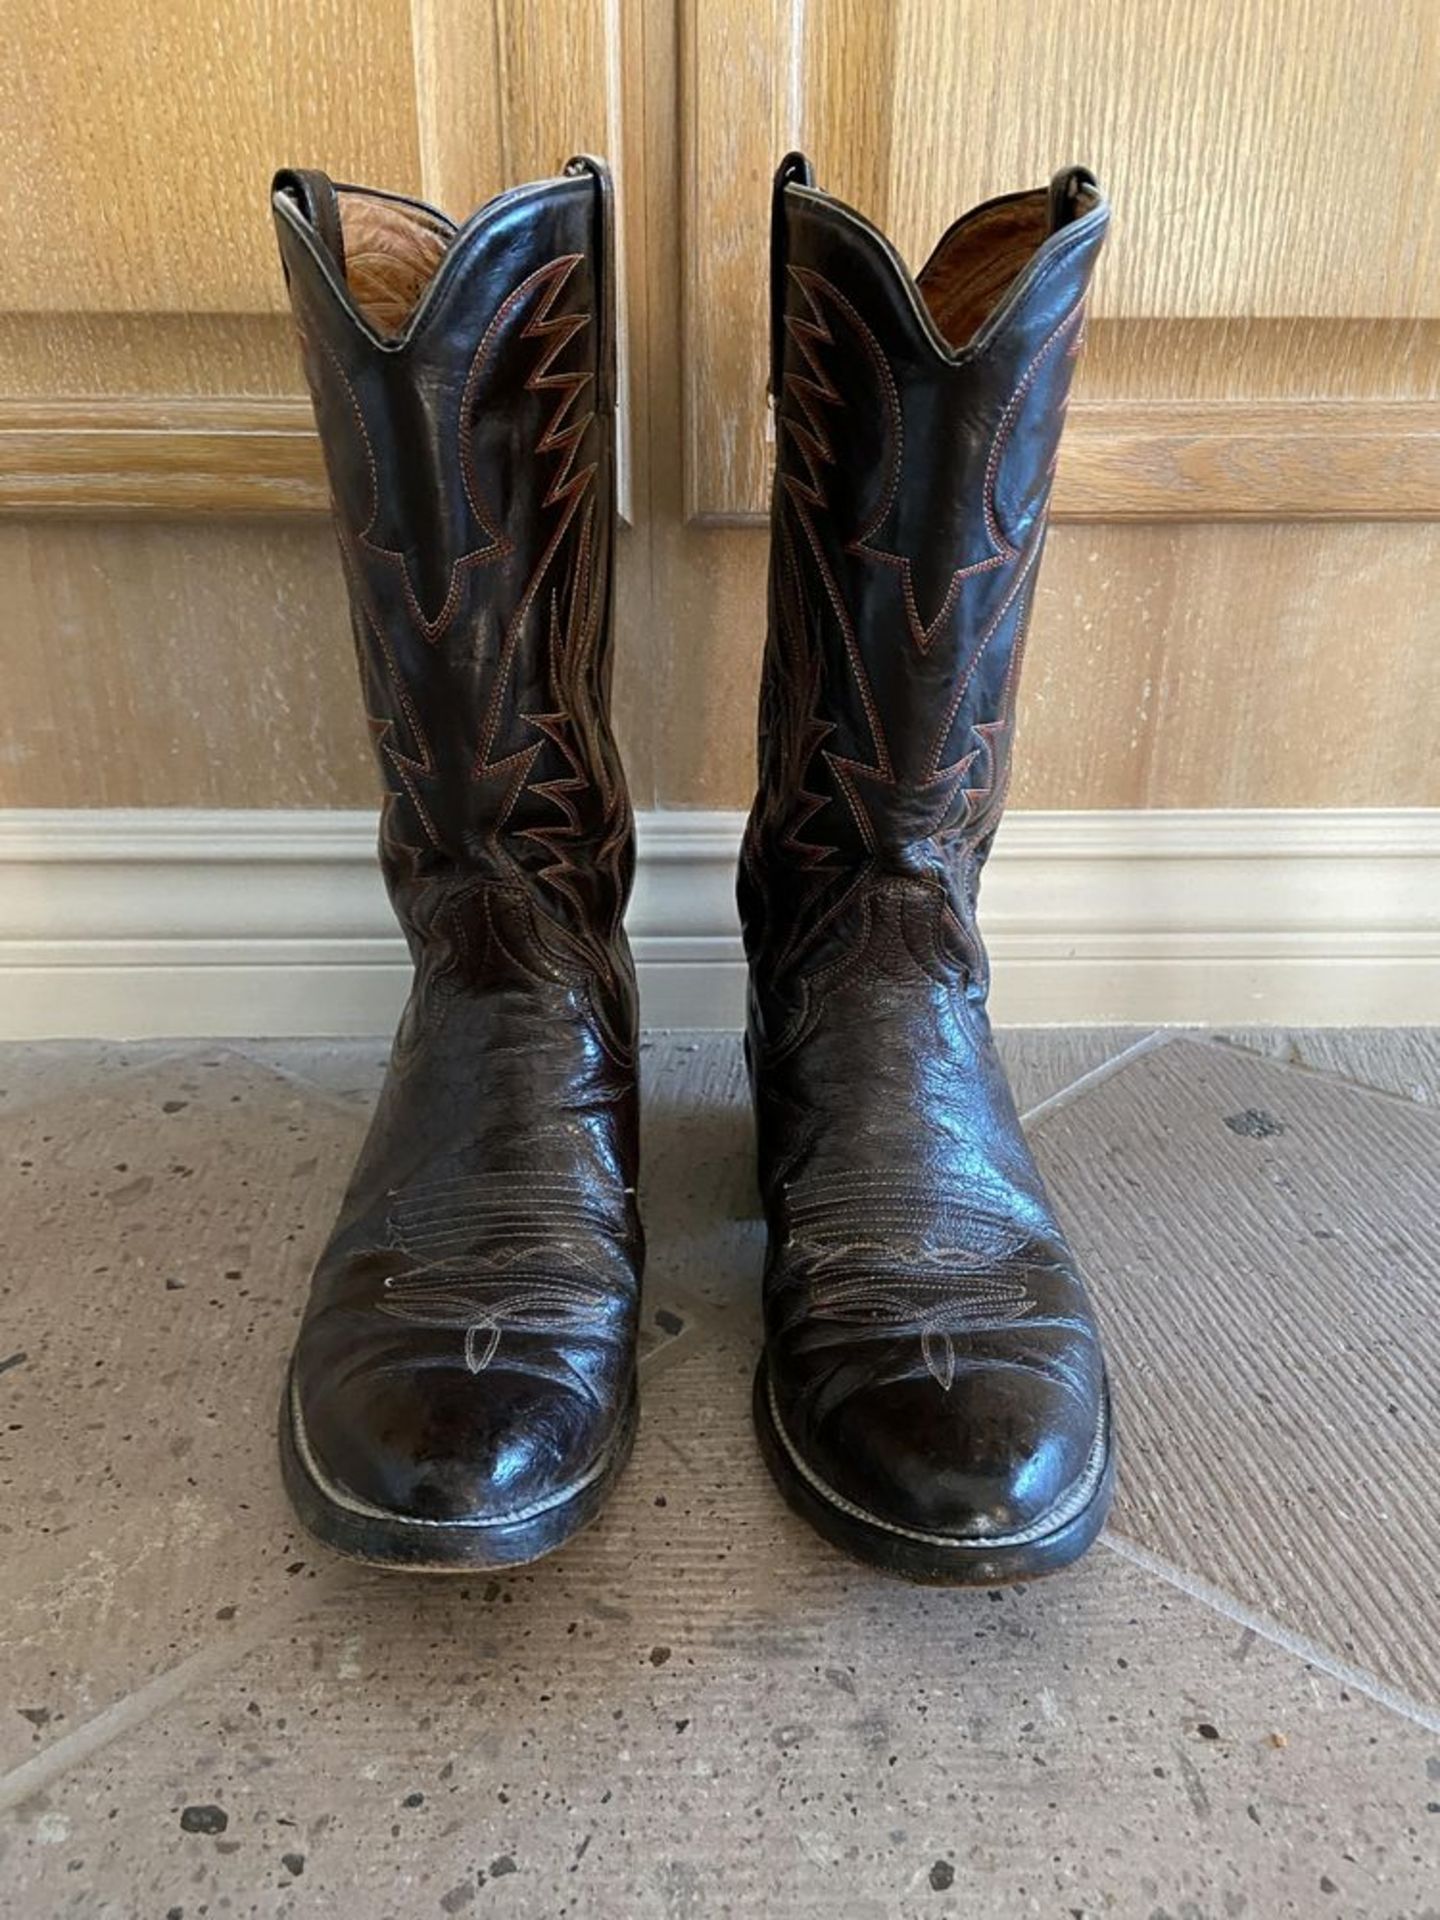 O' Sullivan Cowboy Boots Black, Believed to be Size 10.5 LT6